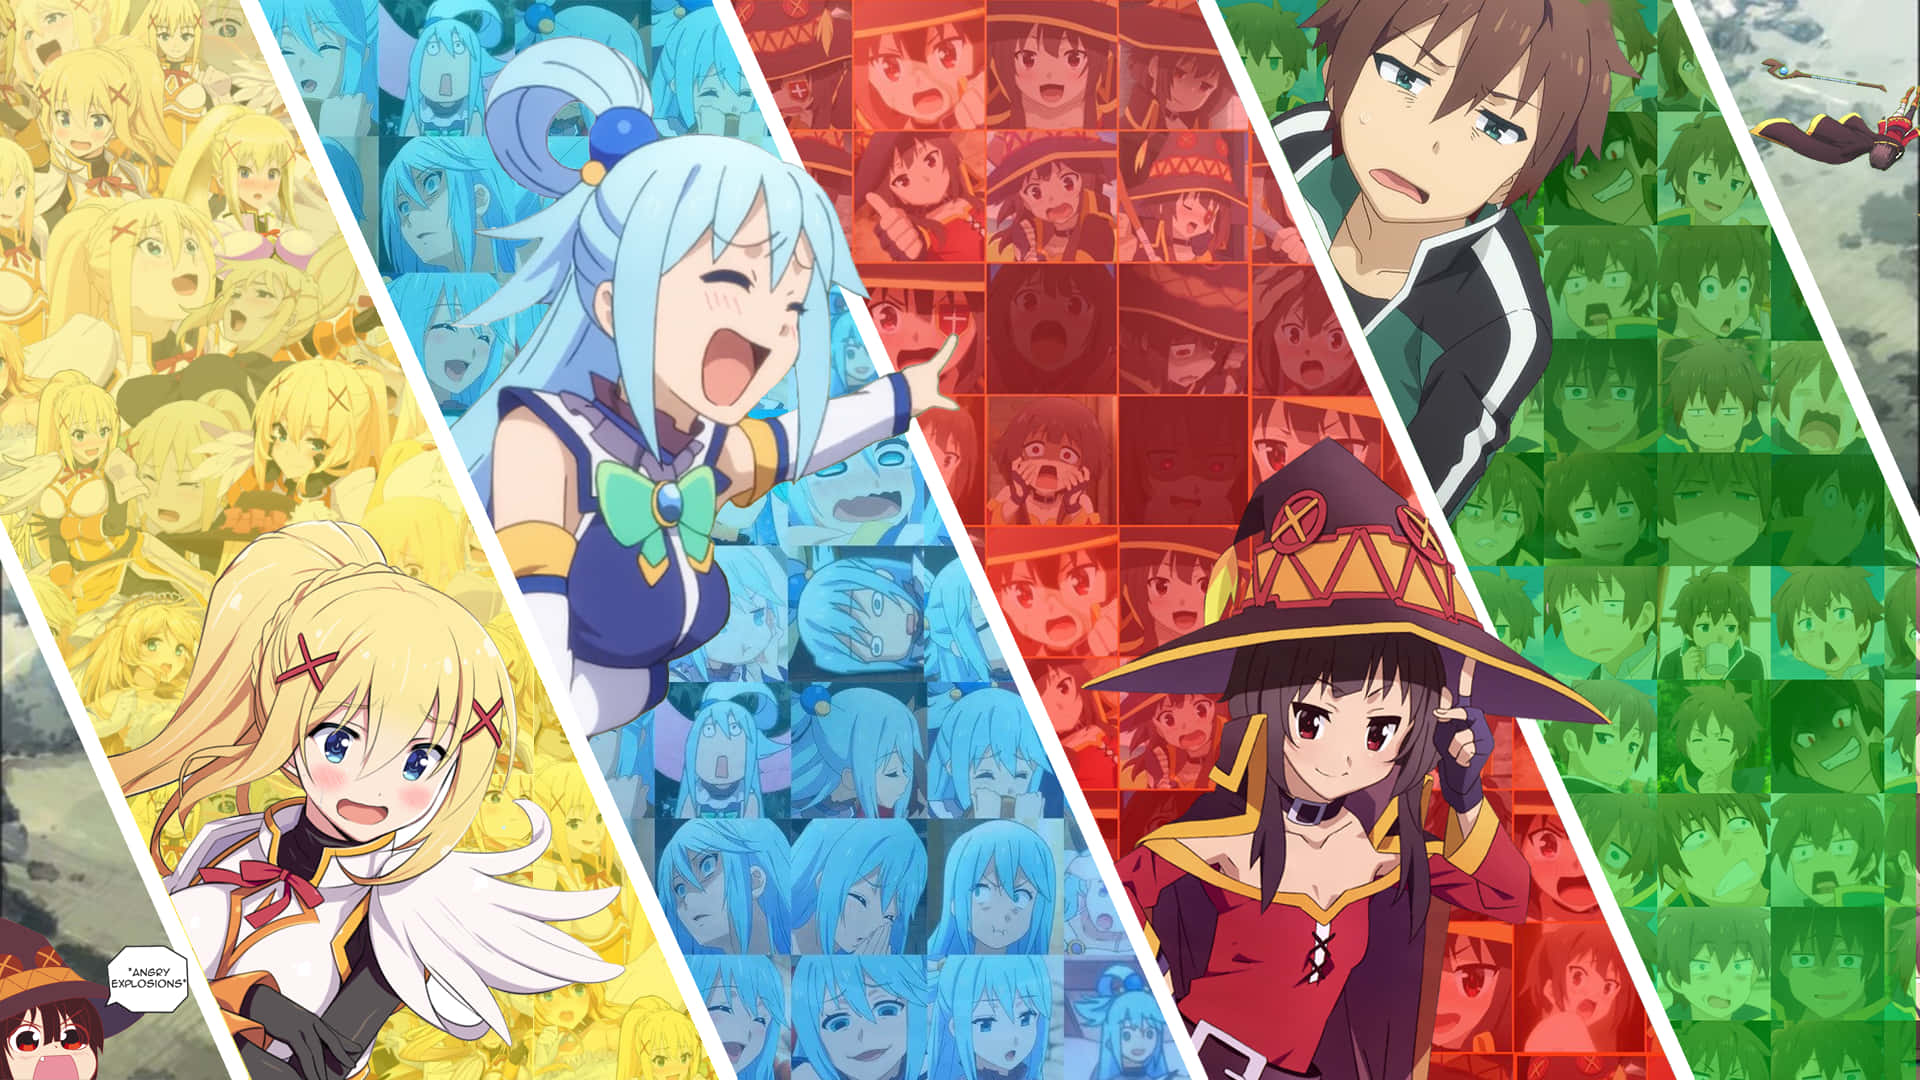 Welcome to the world of Adventure with the wittiest adventurers - Kazuma, Aqua, Megumin and Darkness